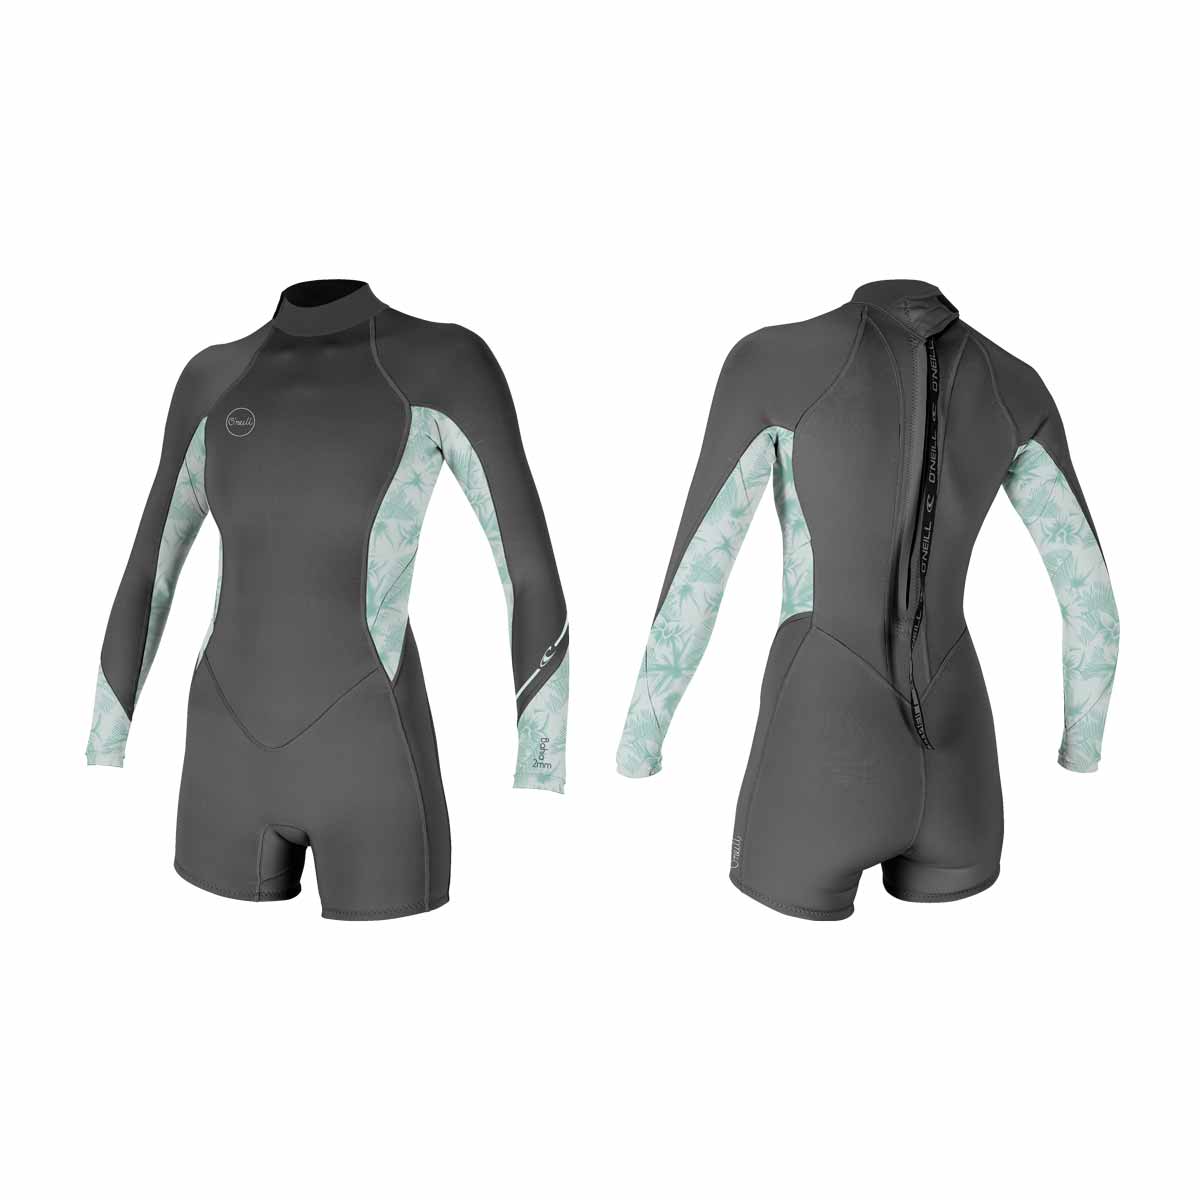 O'Neill Wms Bahia 2/1 Back Zip L/S Spring Wetsuit – Graphite/Mirage Tropical HY8